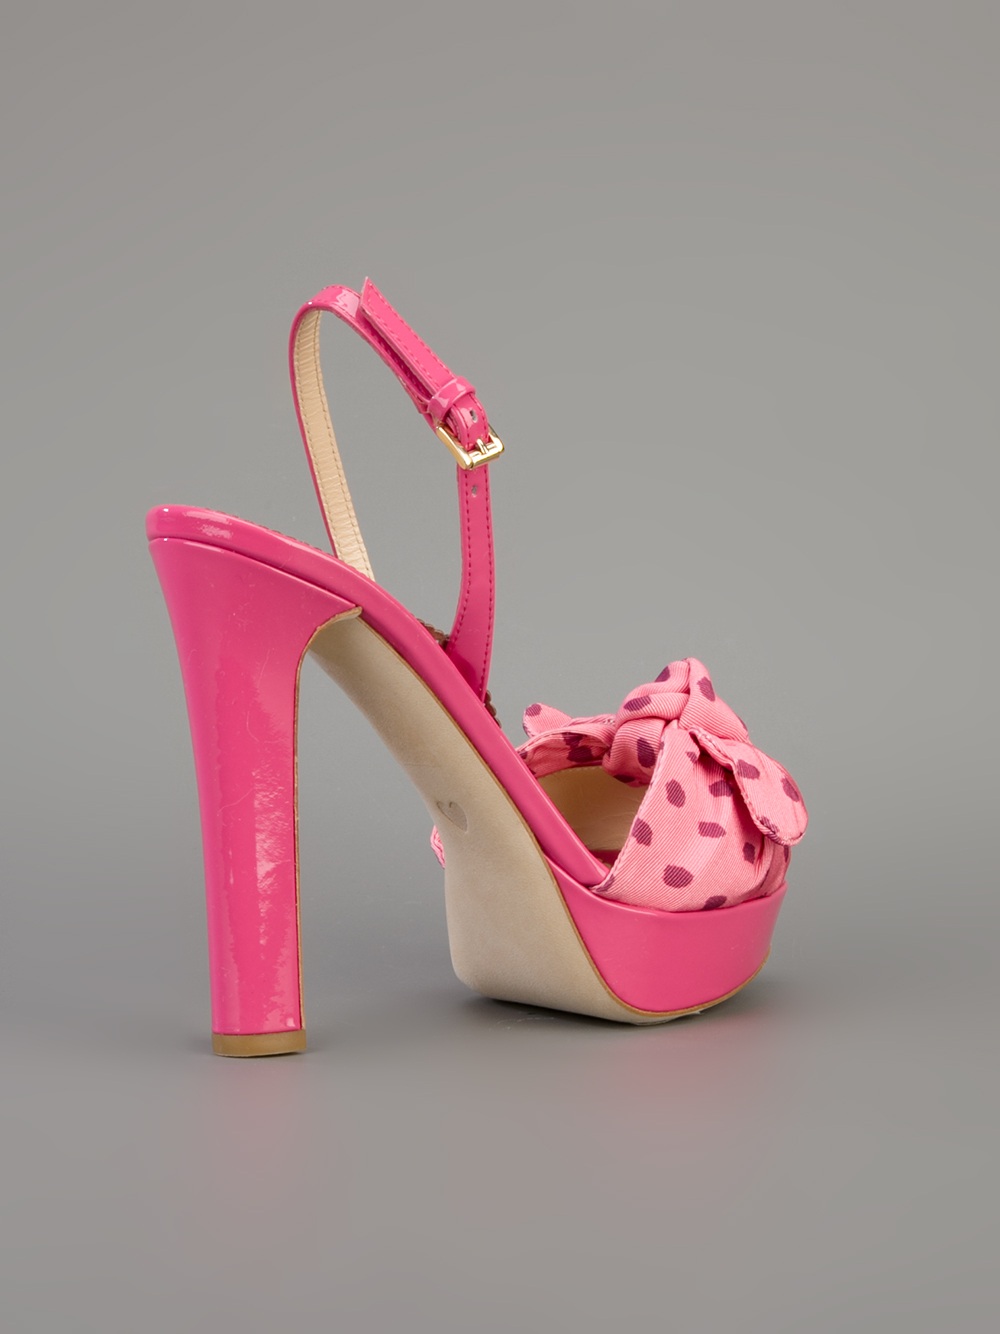 Lyst - Boutique Moschino Polkadot Bow Sandal in Pink